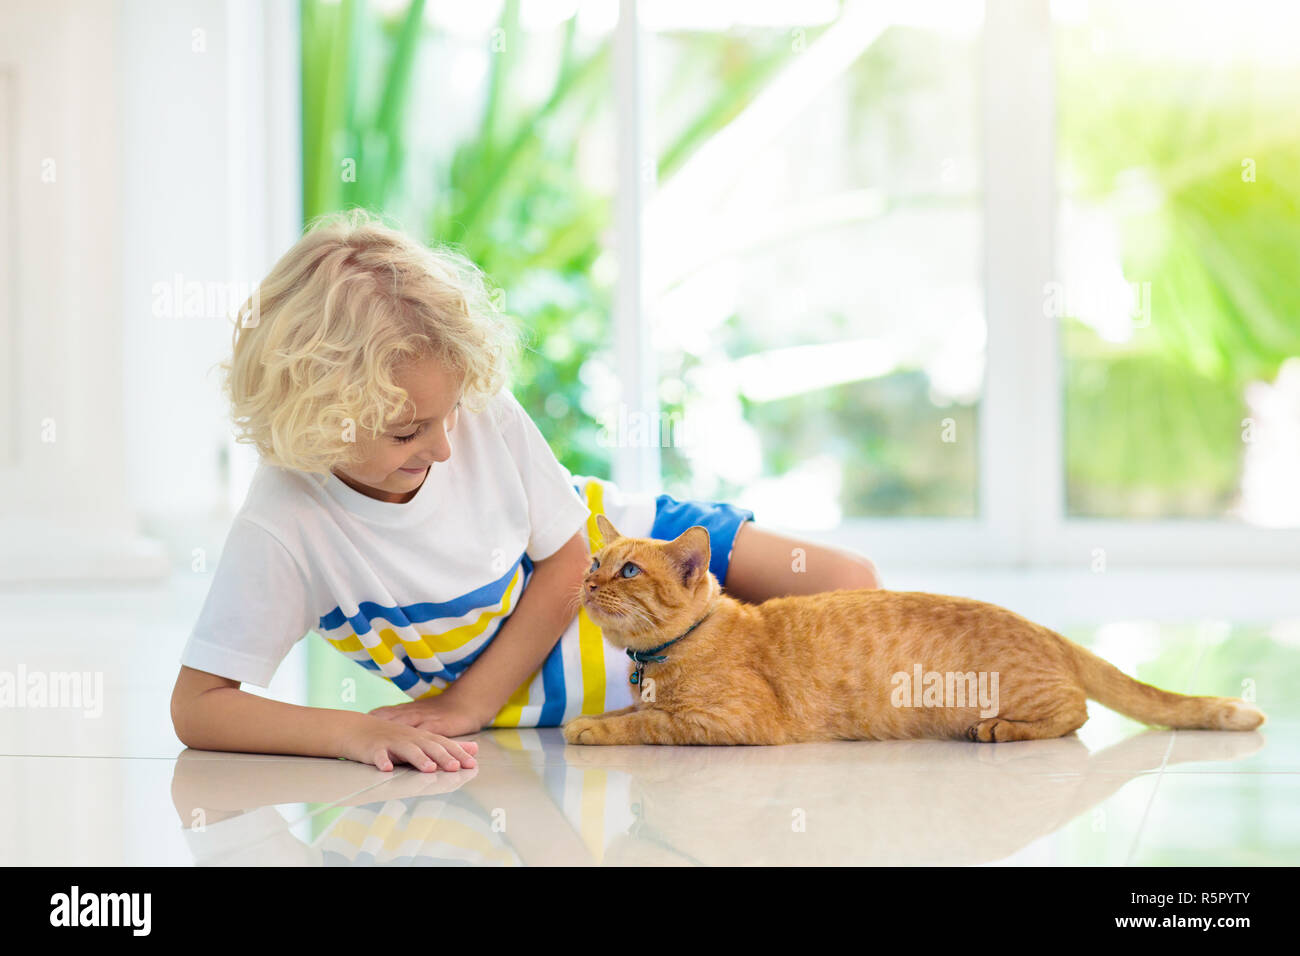 Child feeding cat at home. Kid and pet. Little blond curly boy playing with kitten in white kitchen at window. Domestic animals and pets for children. Stock Photo